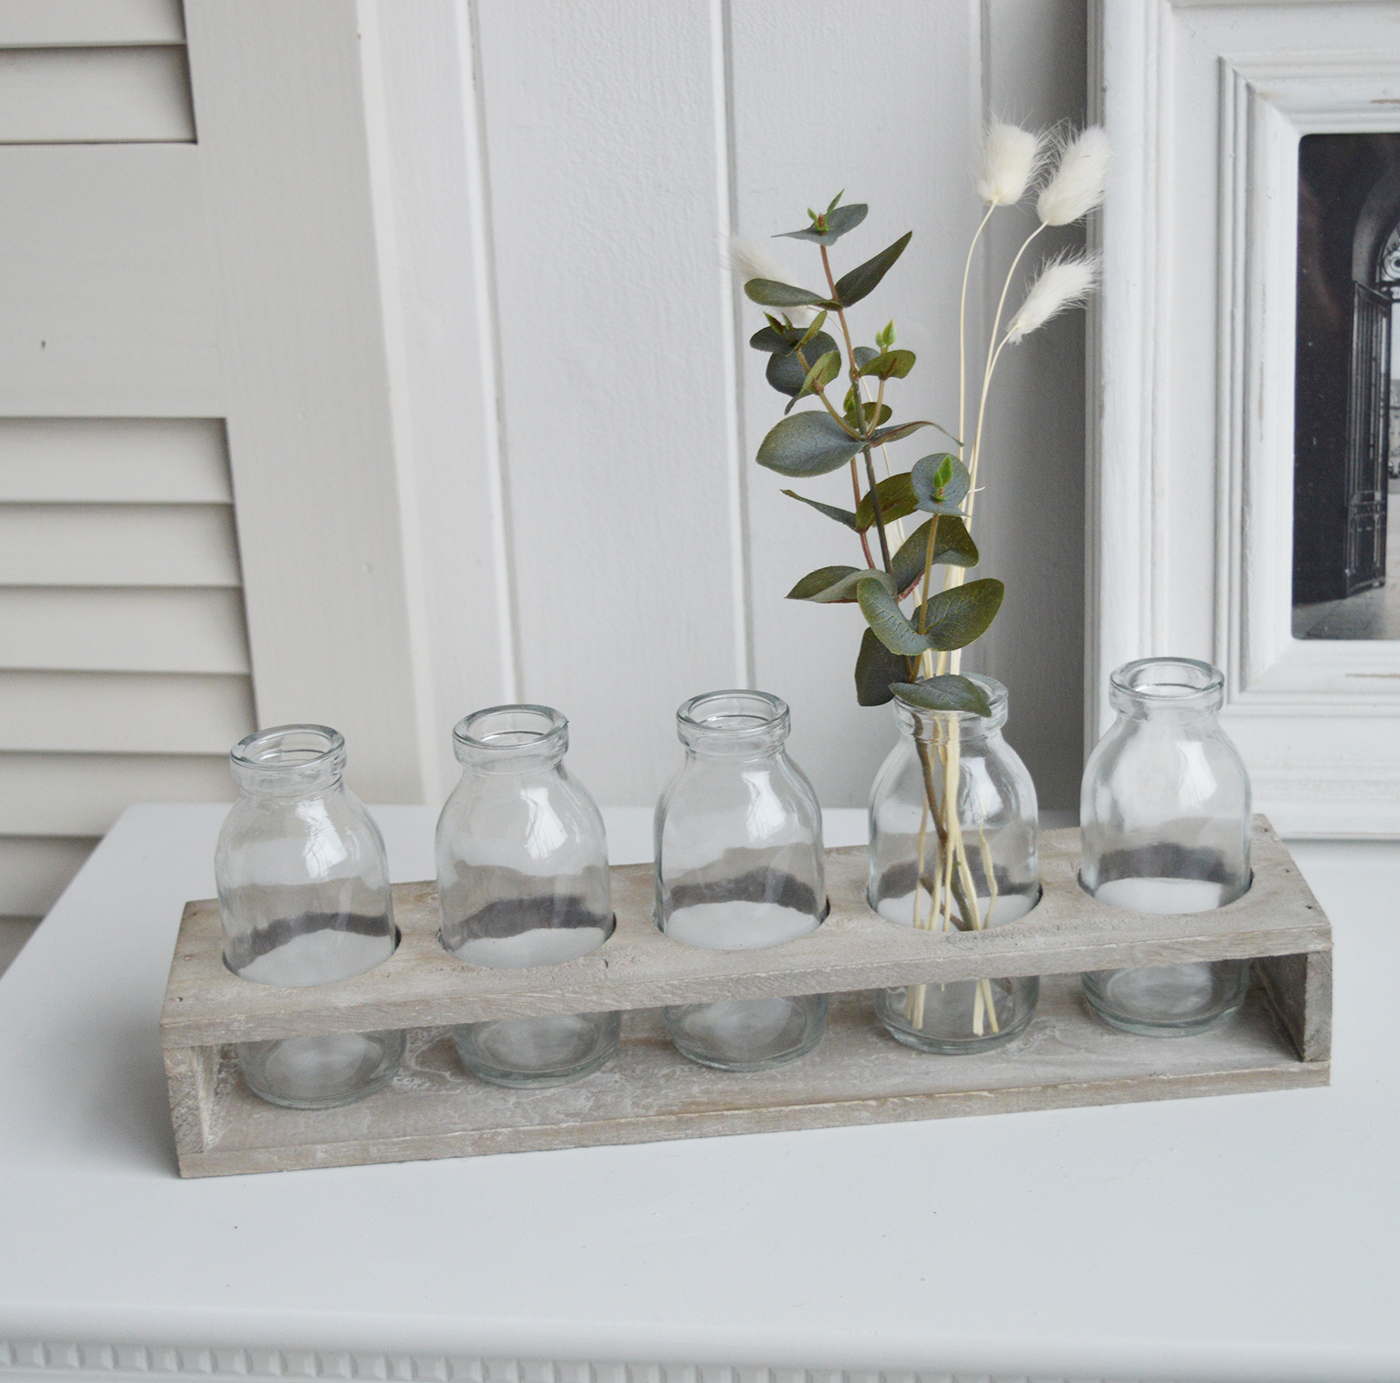 Newbury Small Glass Bud Vase in wooden Tray from The White Lighthouse coastal, New England and country furniture and home decor accessories UK